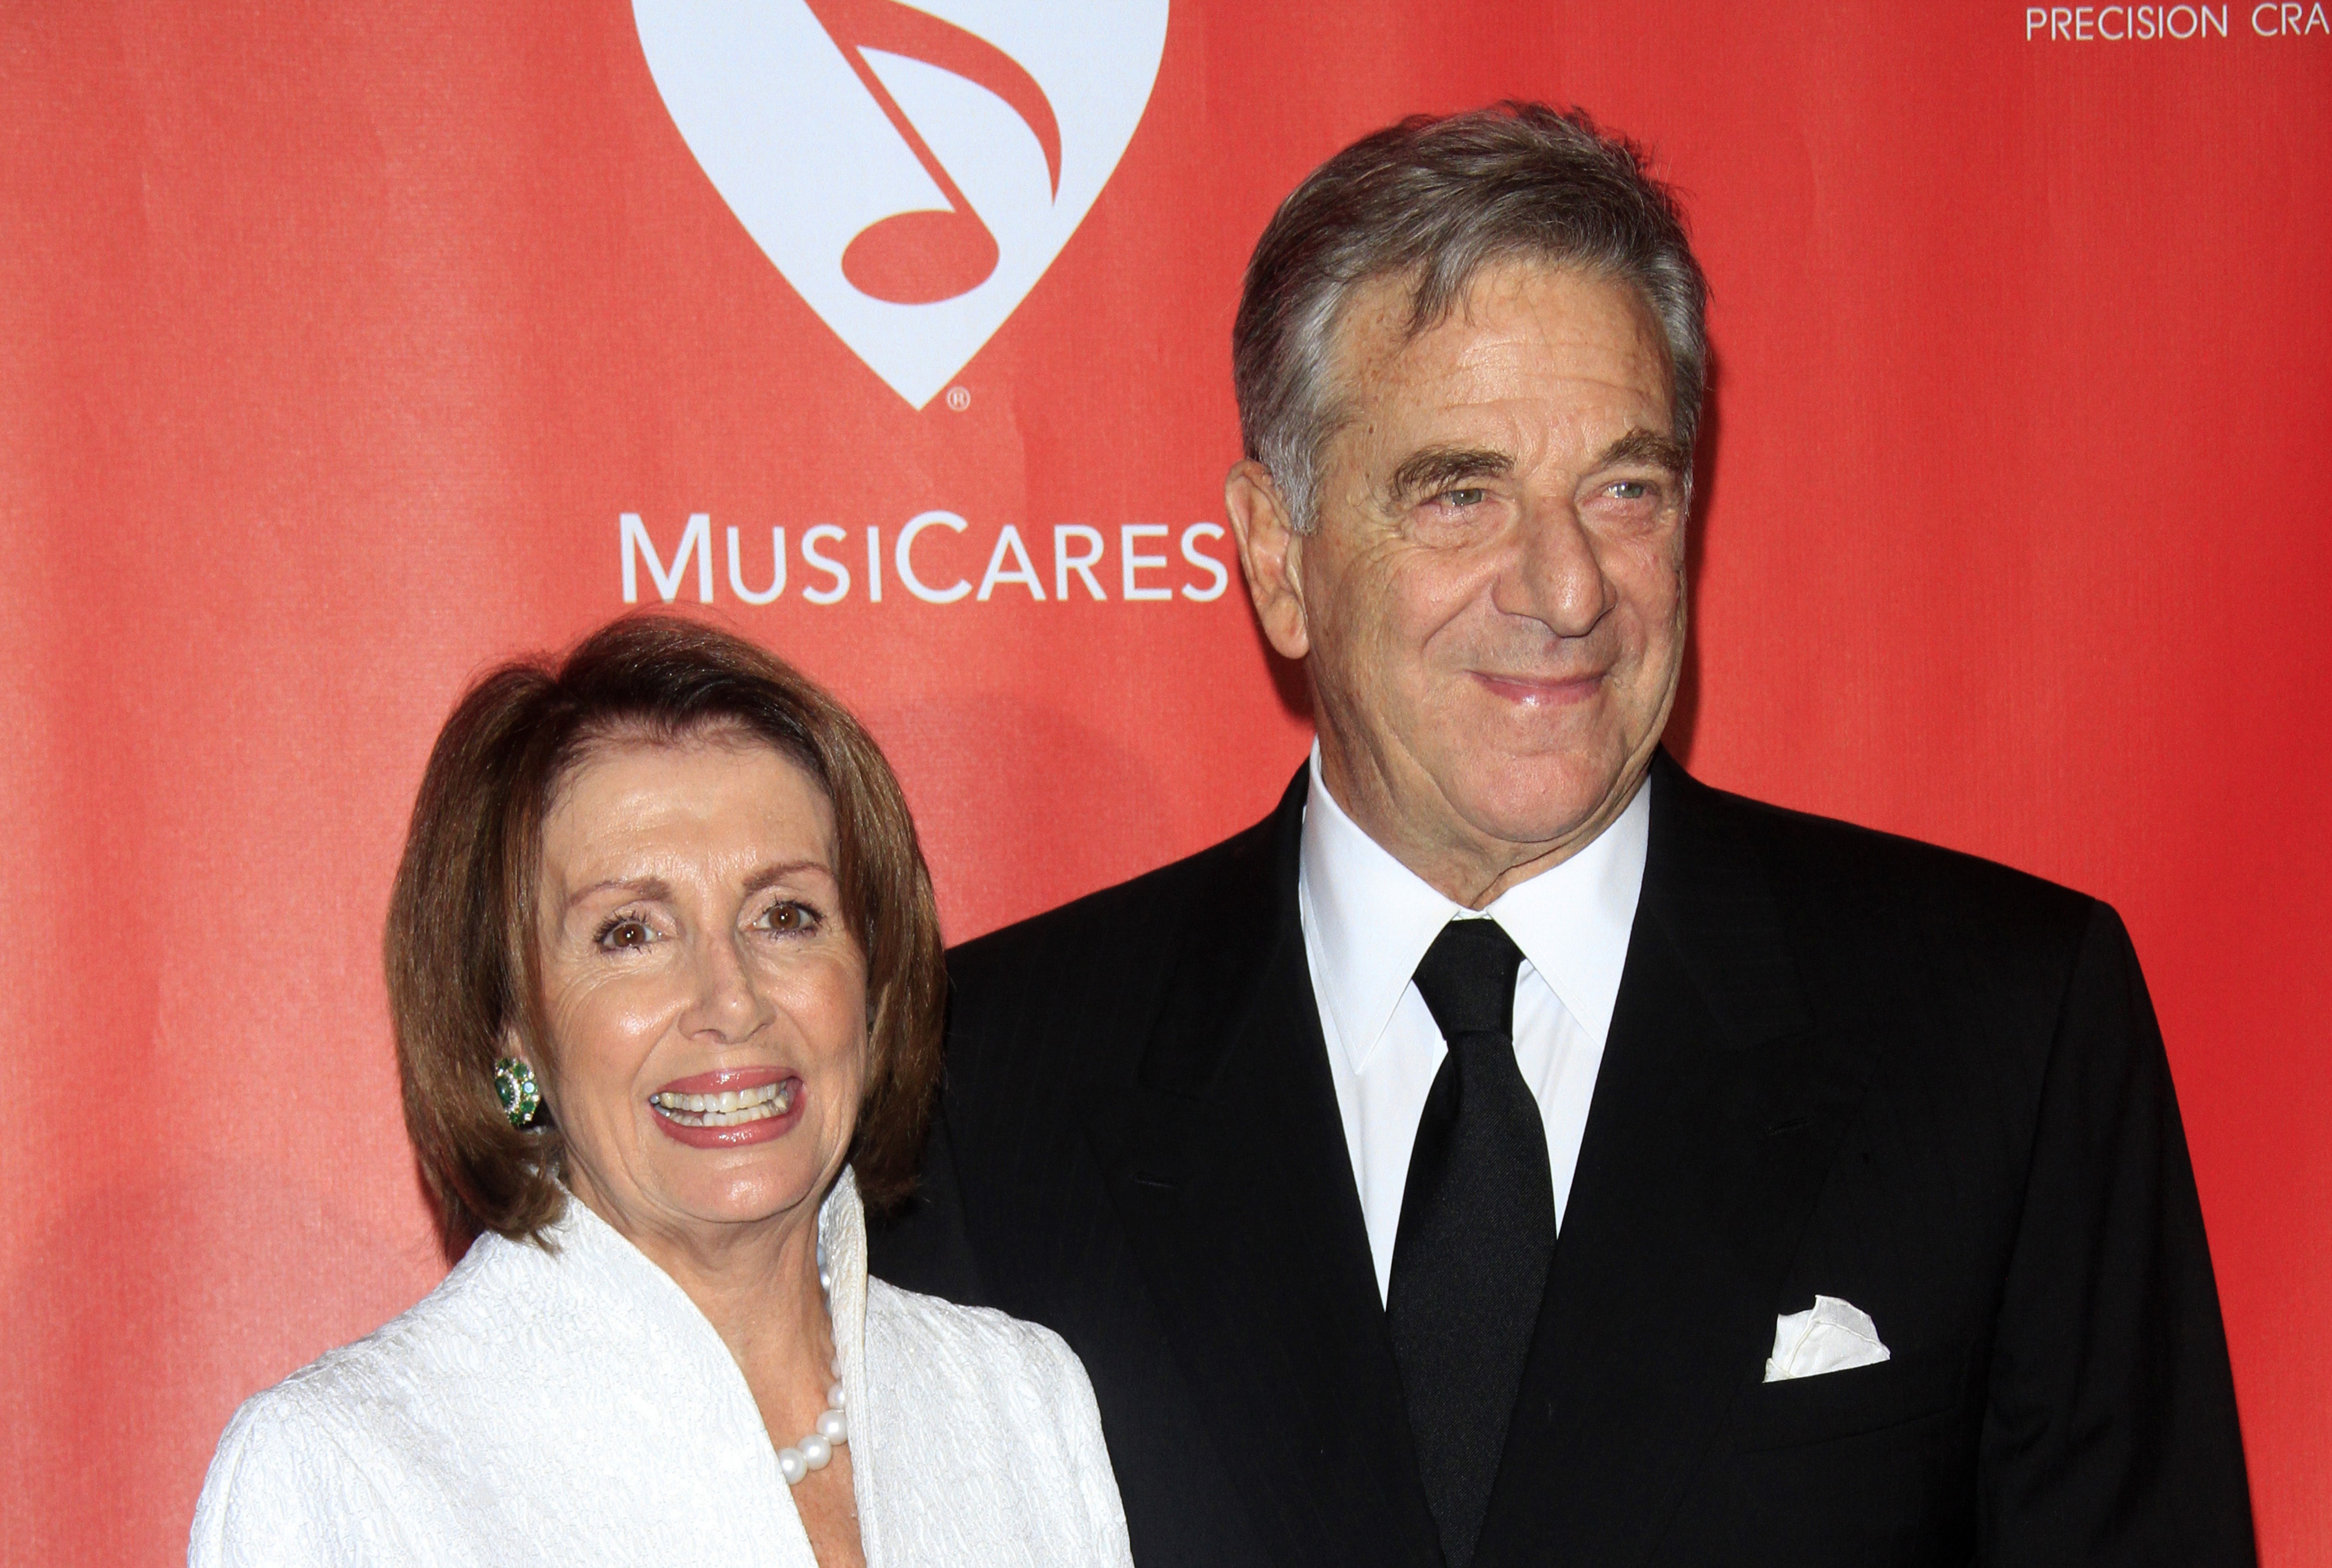 Nancy Pelosi&#39;s Husband Sentenced To Jail Time After Pleading Guilty To Drunken Driving